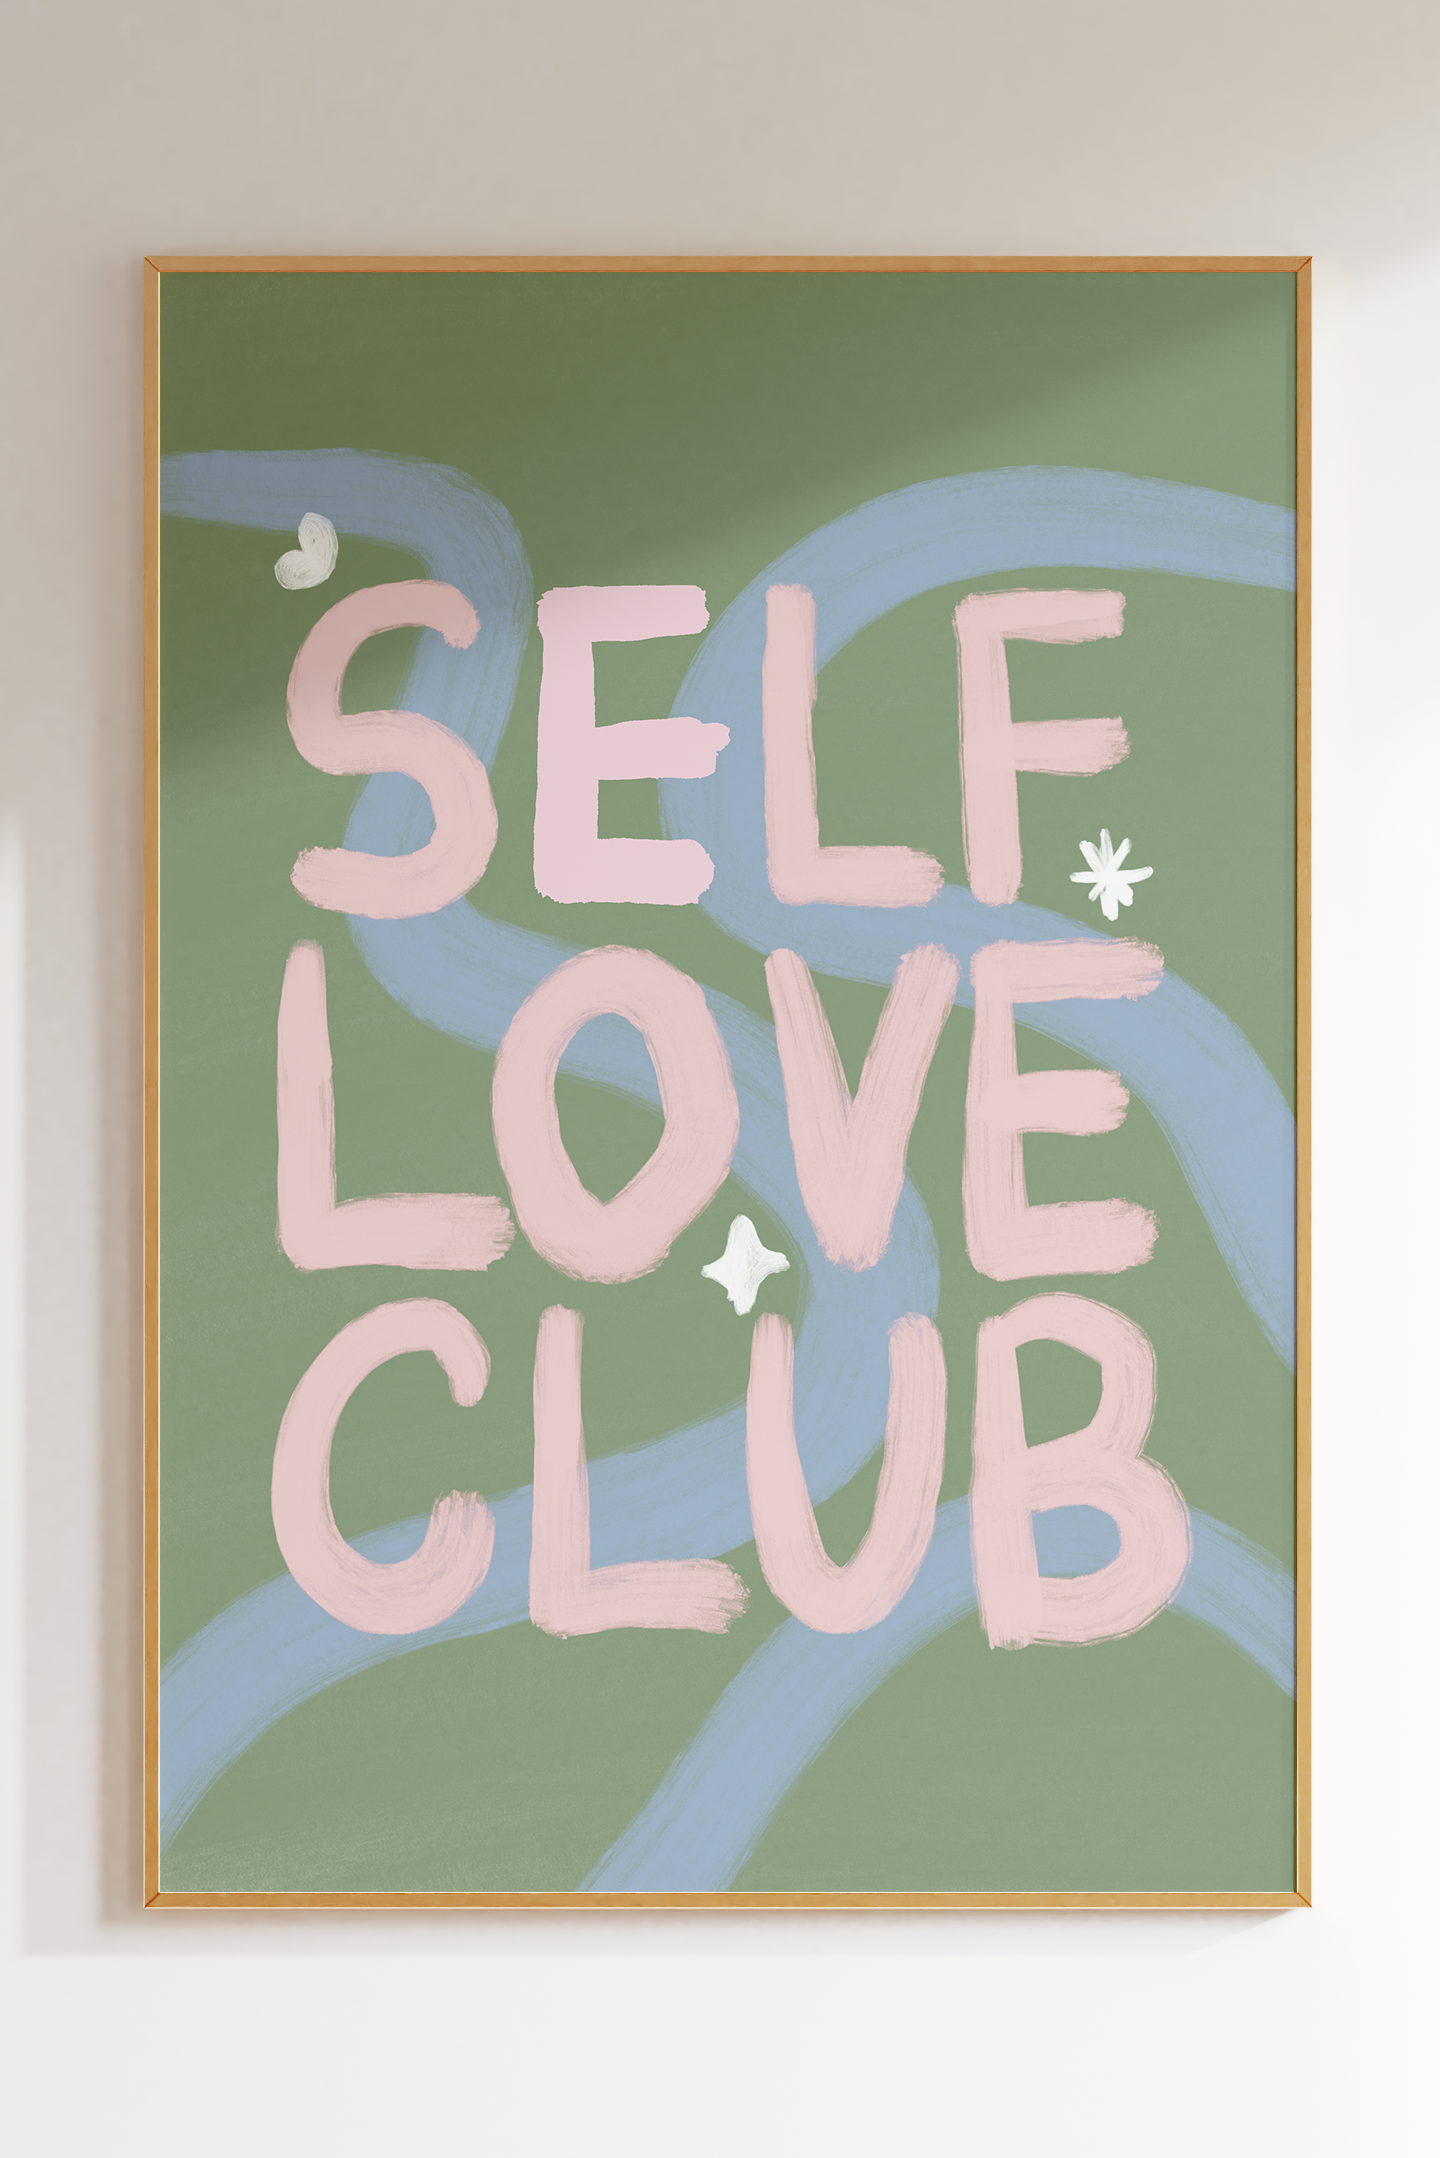 Self Love Club (old style paper)